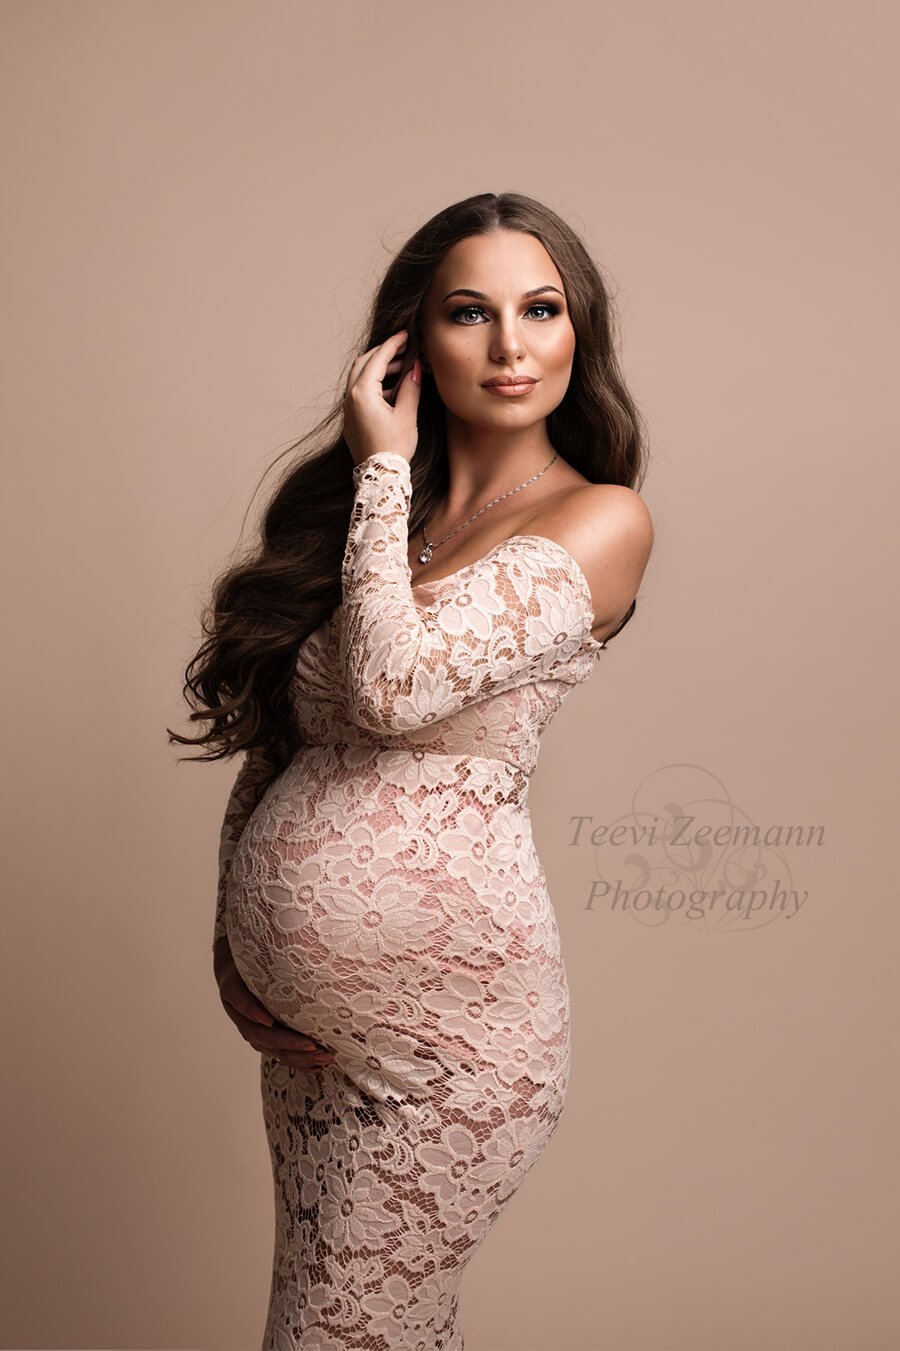 This long off the sholder dress is made out of lace . The model has long brown hair and she is pregnant